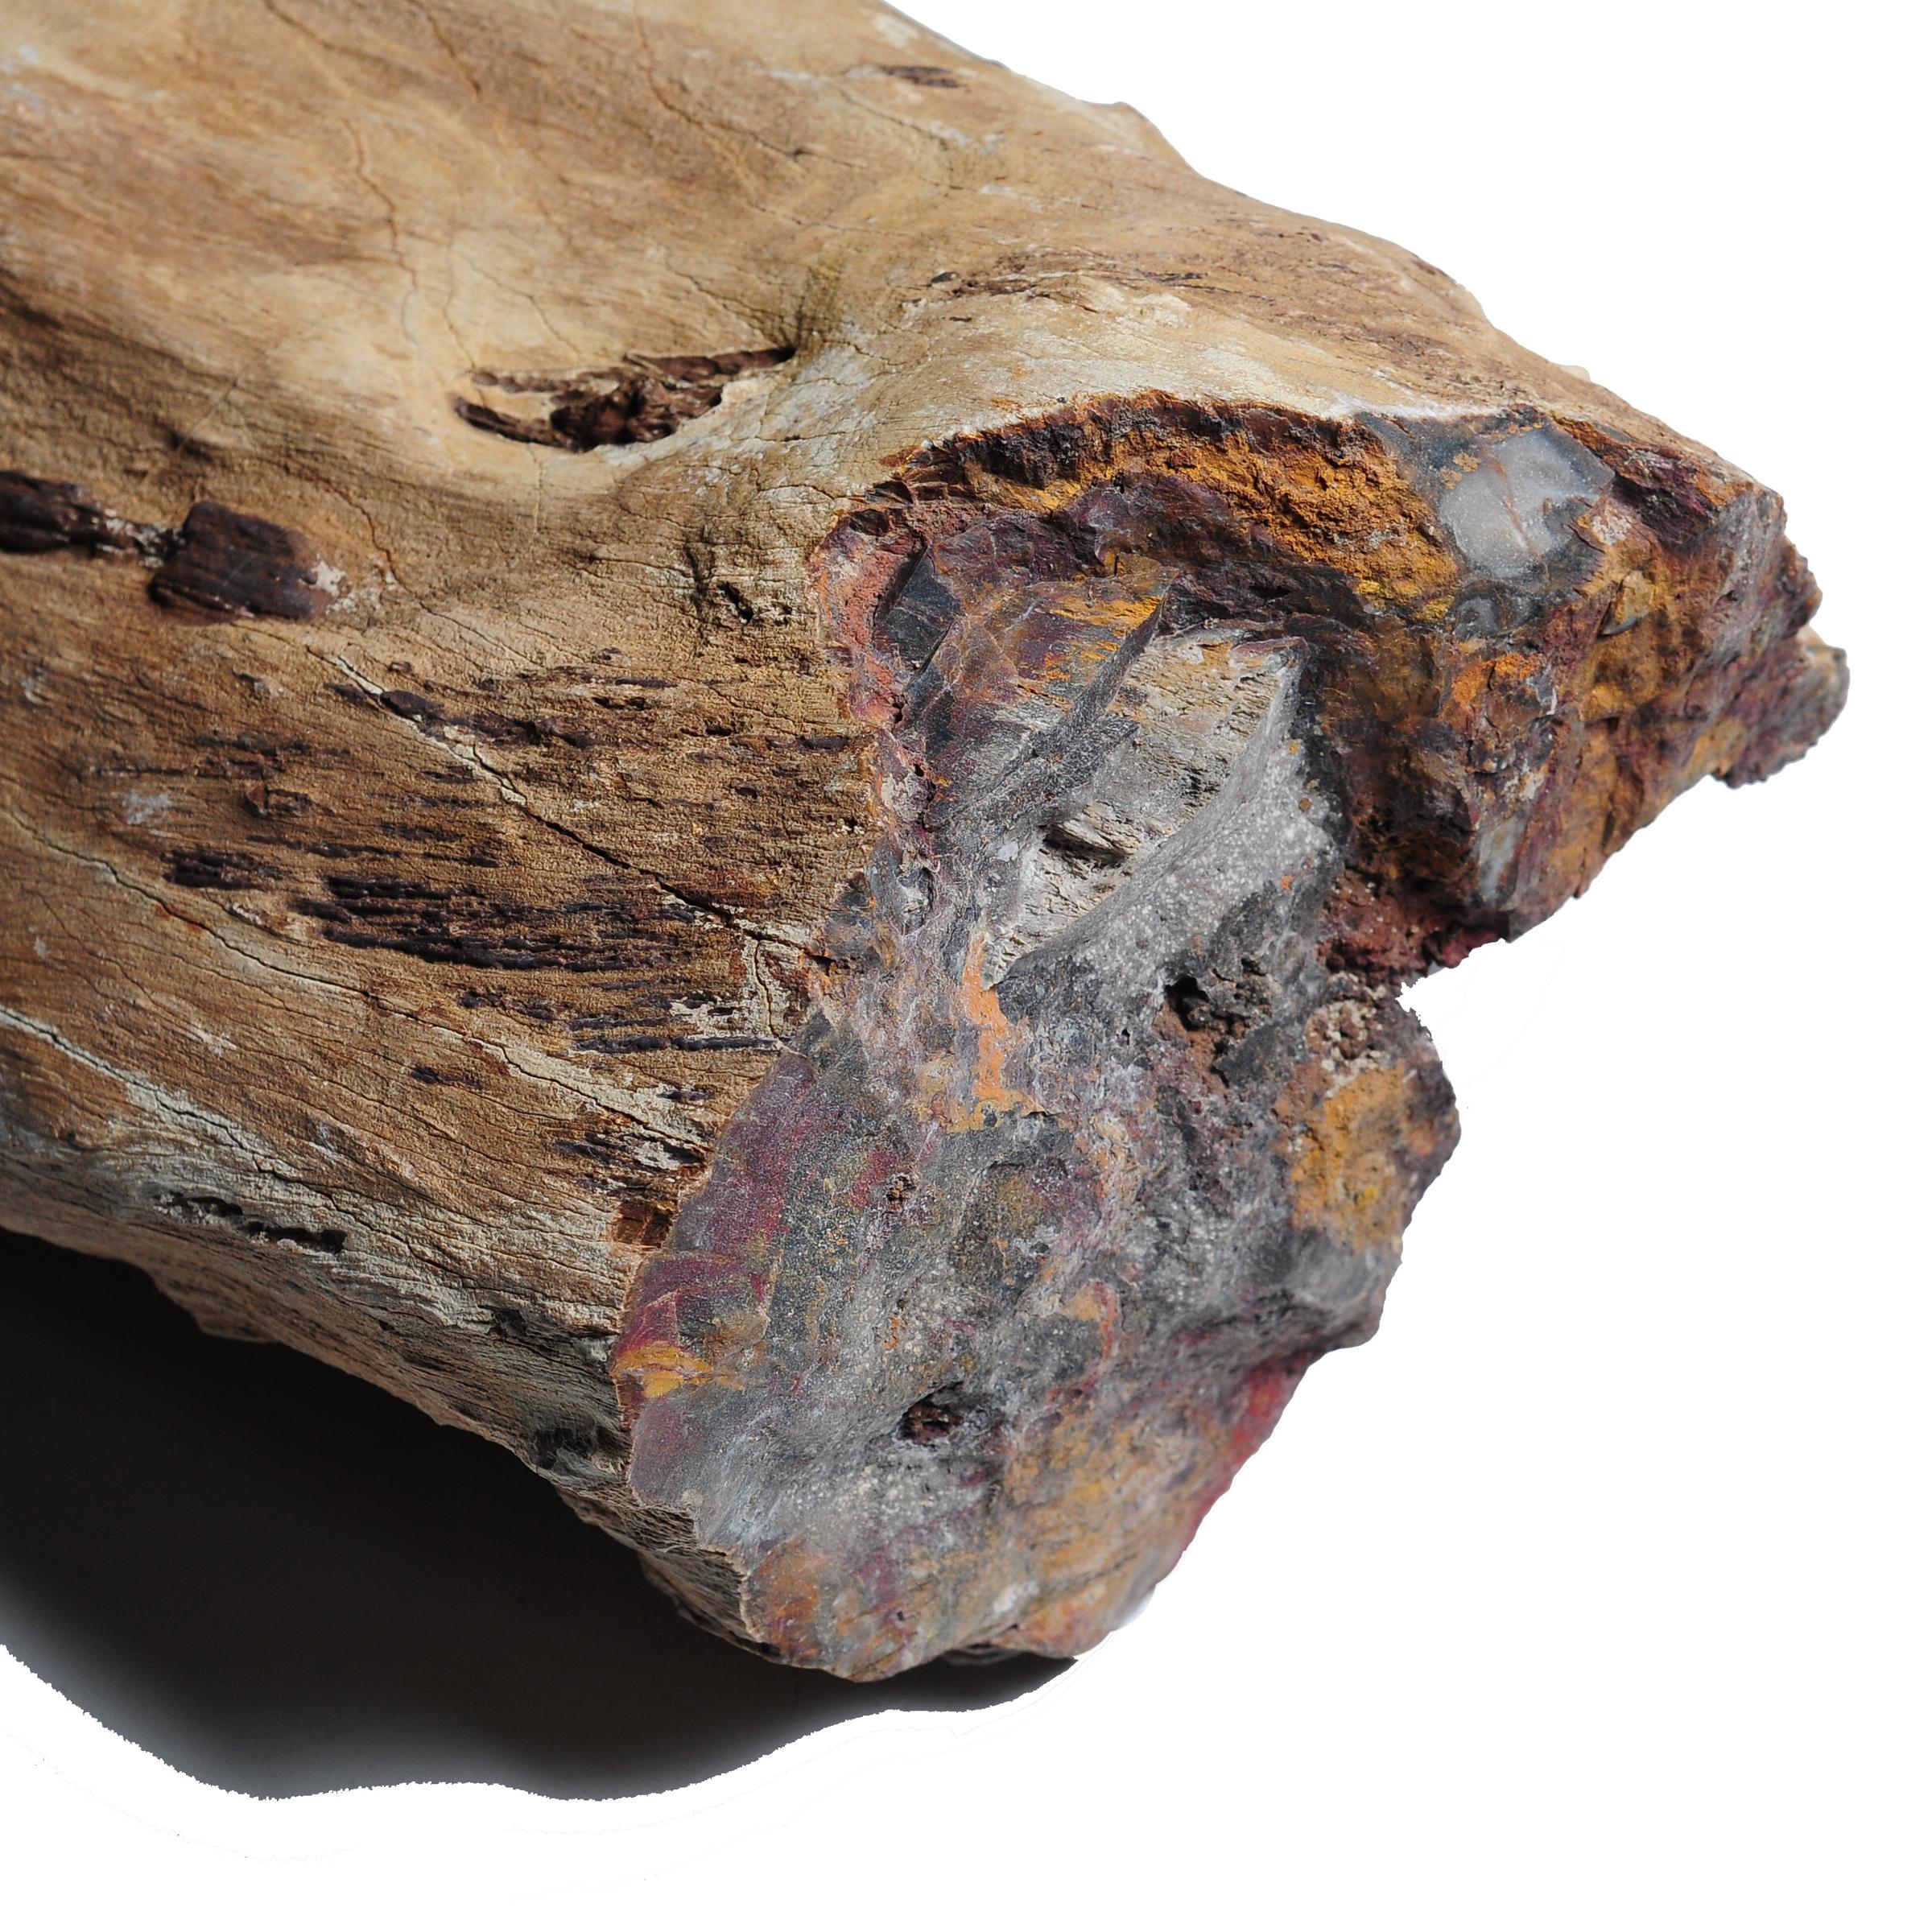 Like scholars' rocks, petrified, or fossilized, wood is appreciated for its natural beauty. Sometimes called 